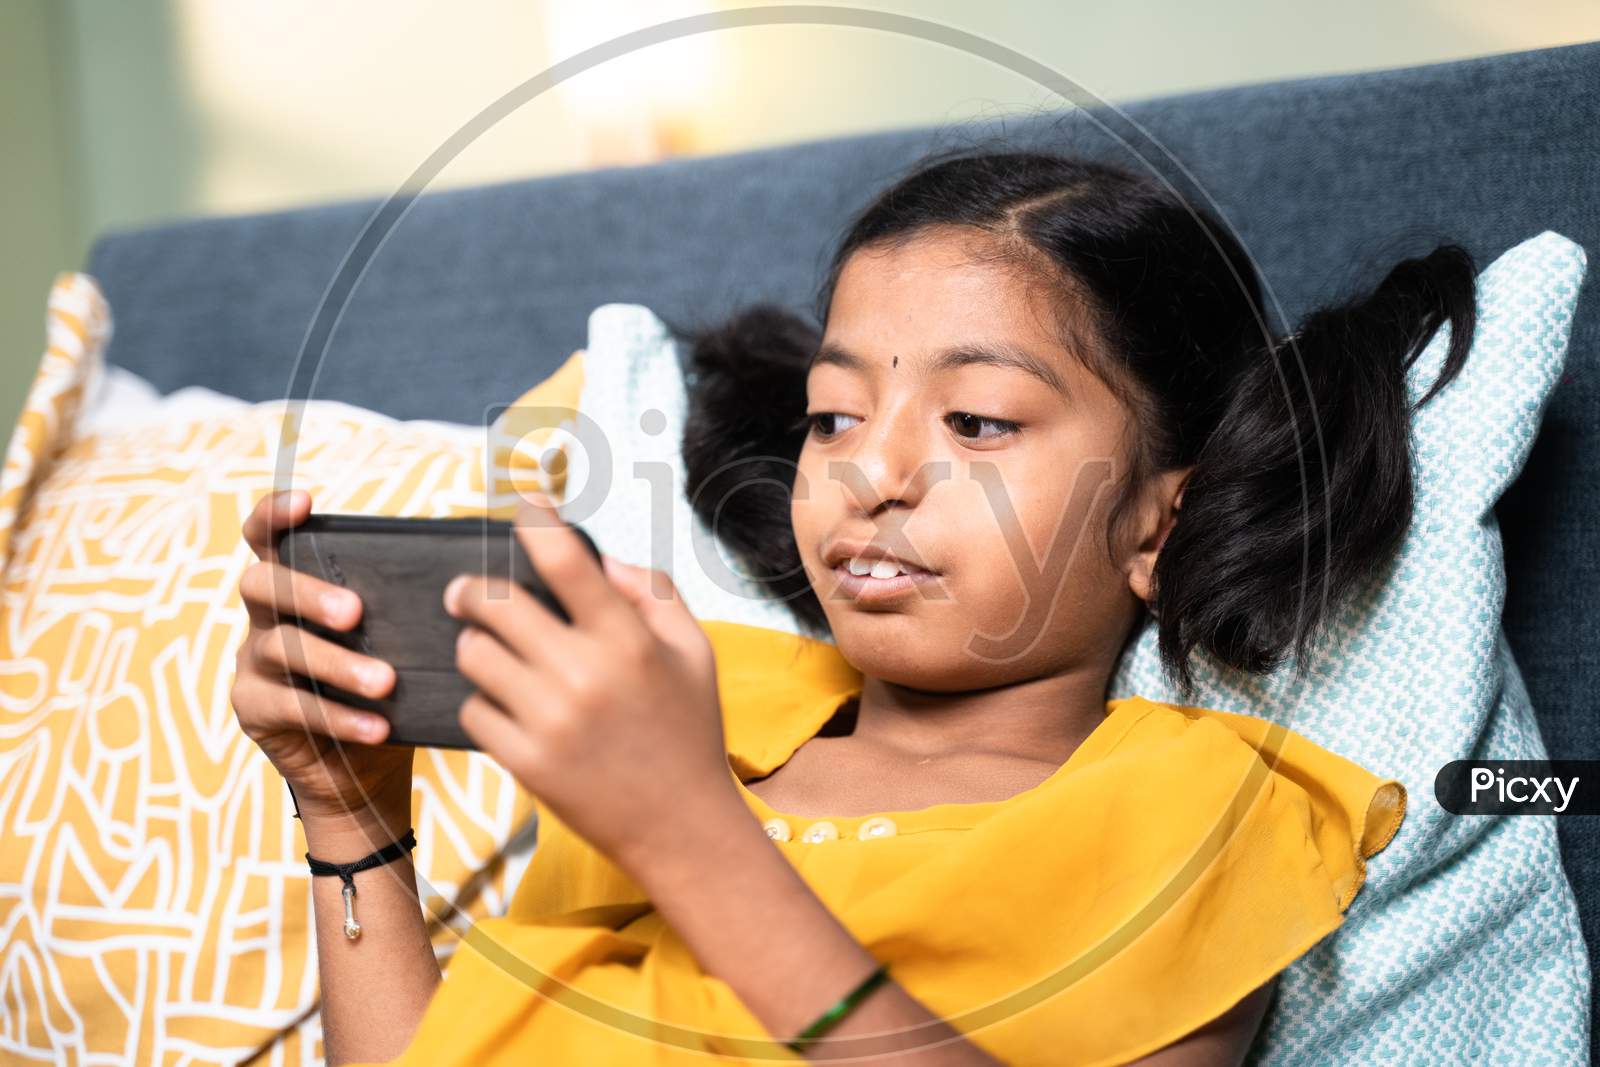 Young Girl Disabled Kid Using Mobile Phone While Sleeping On Sofa - Concept Of Kid Mobile Phone Game Addiction, Technology And Modern Lifestyle.